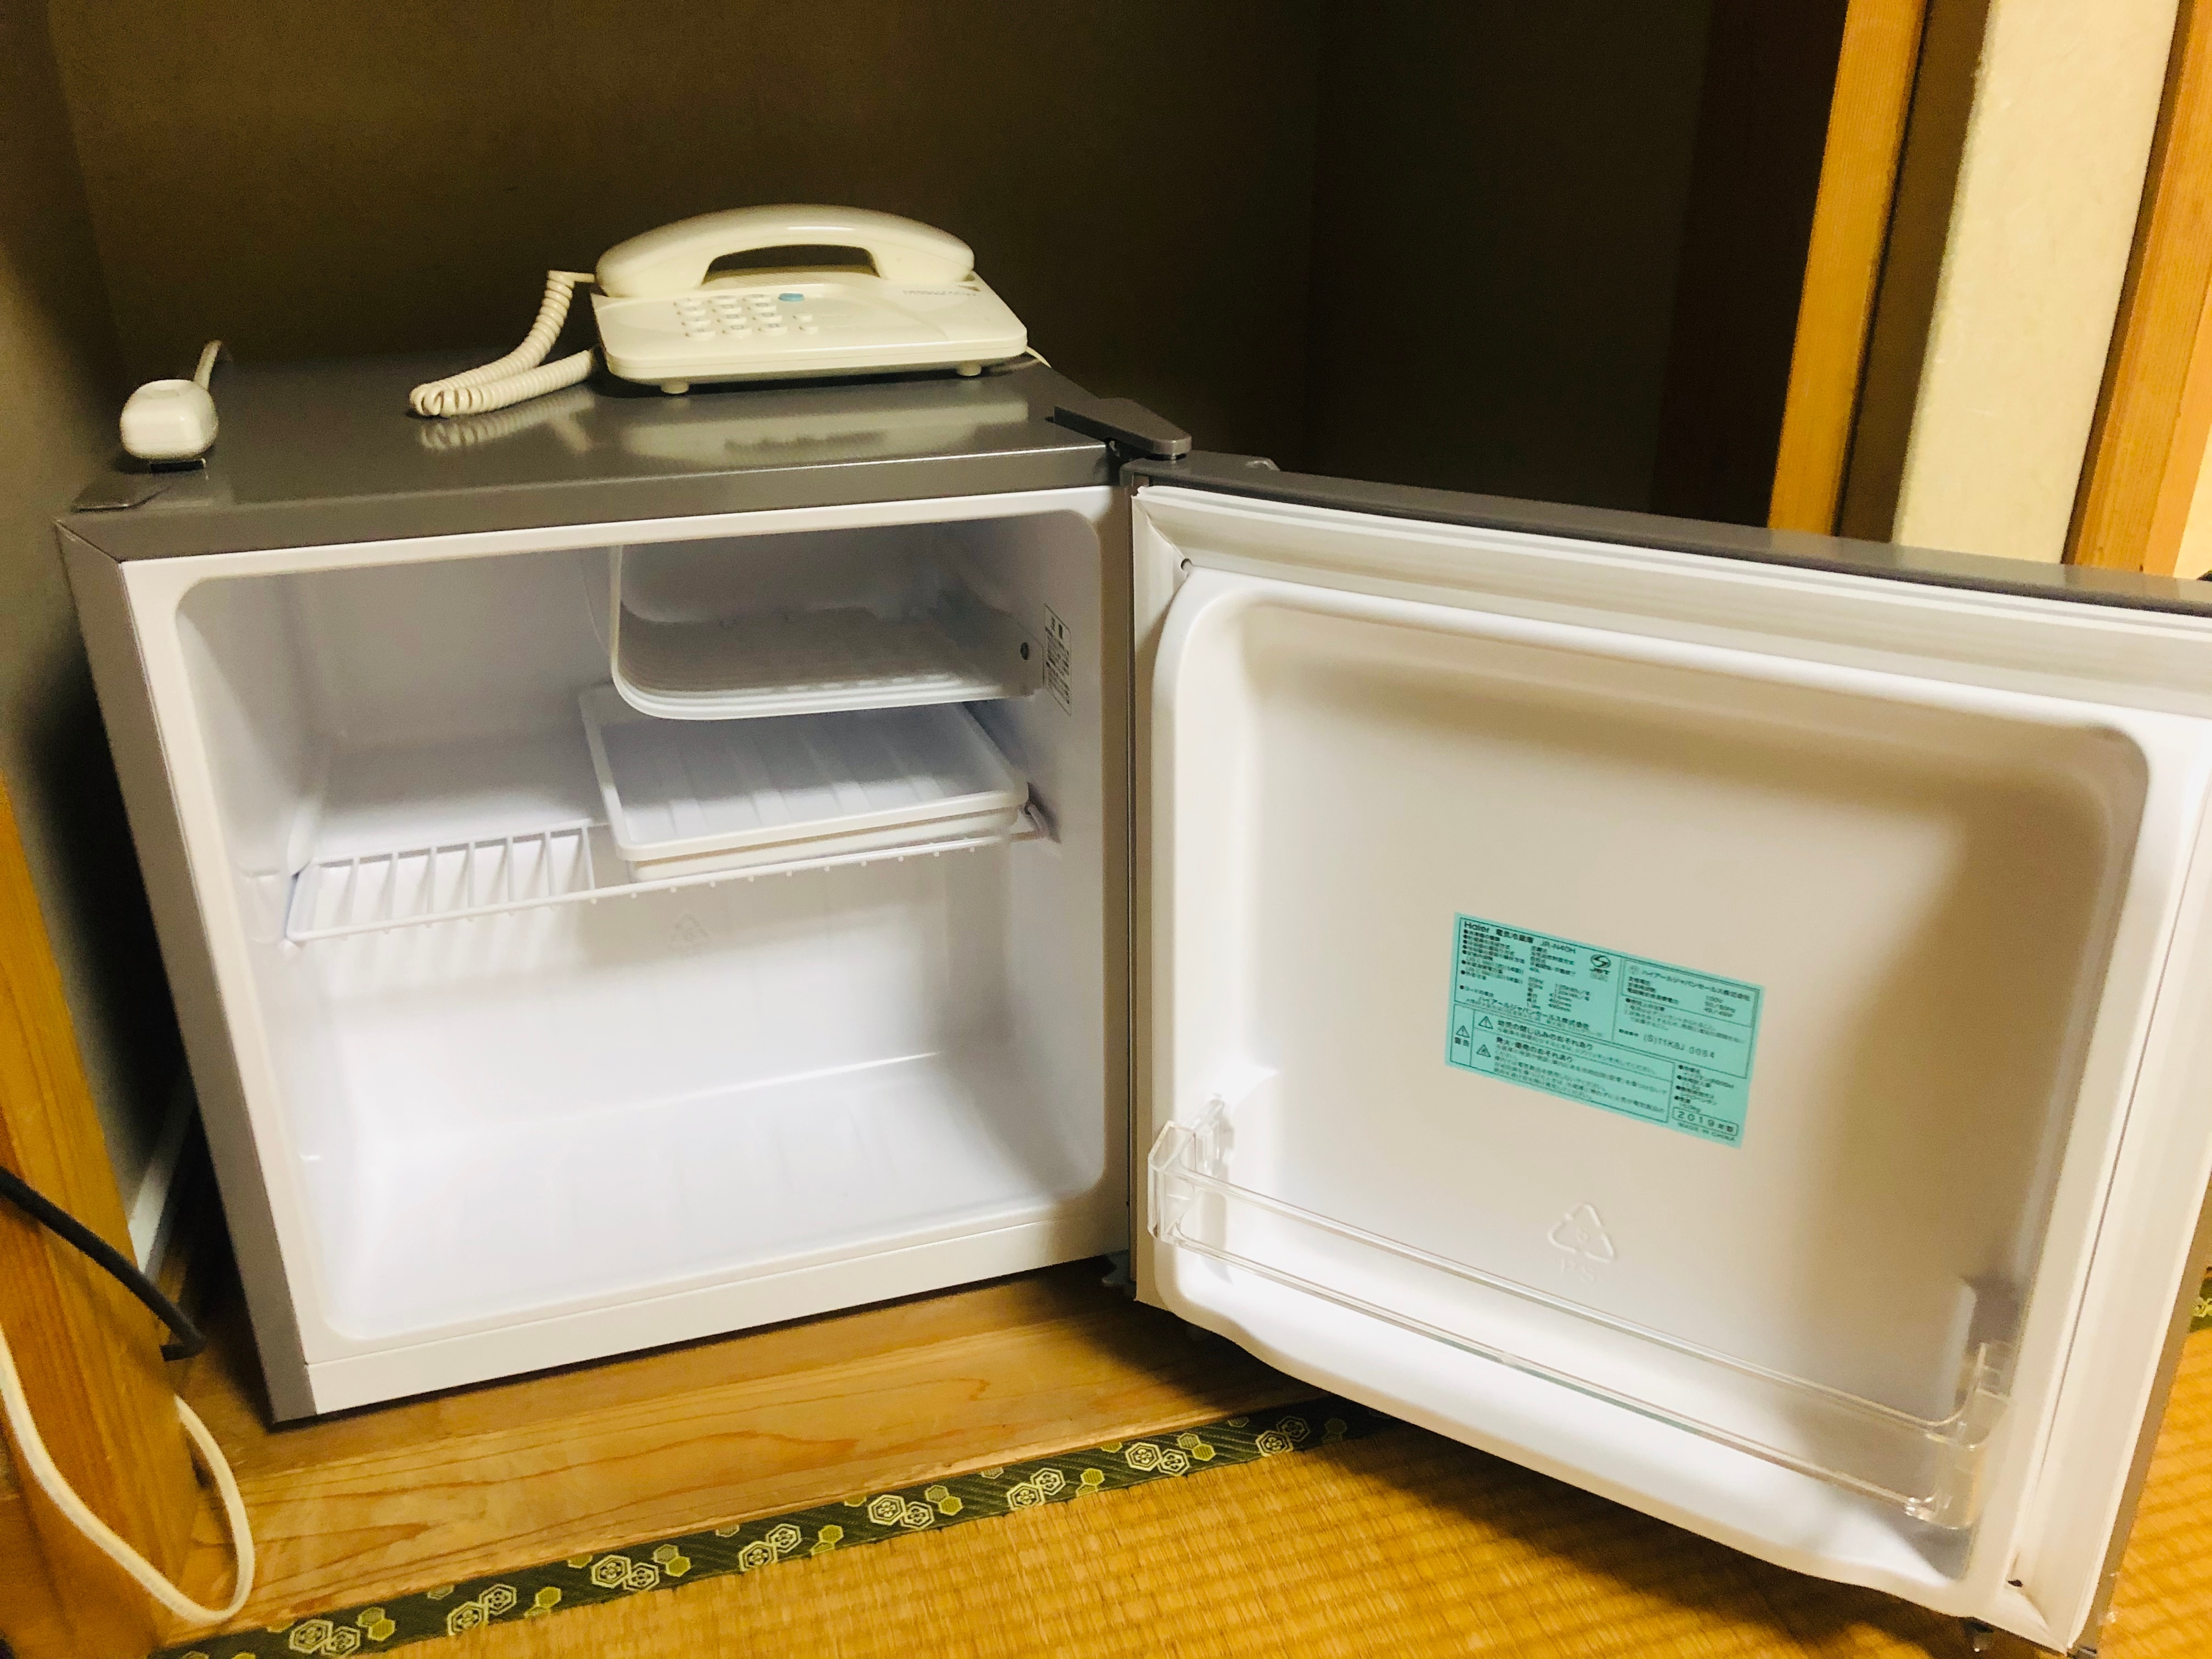 [Refrigerator] Japanese-style room with freezer The Perche refrigerator was disposed of and replaced with a compressor direct cooling type.